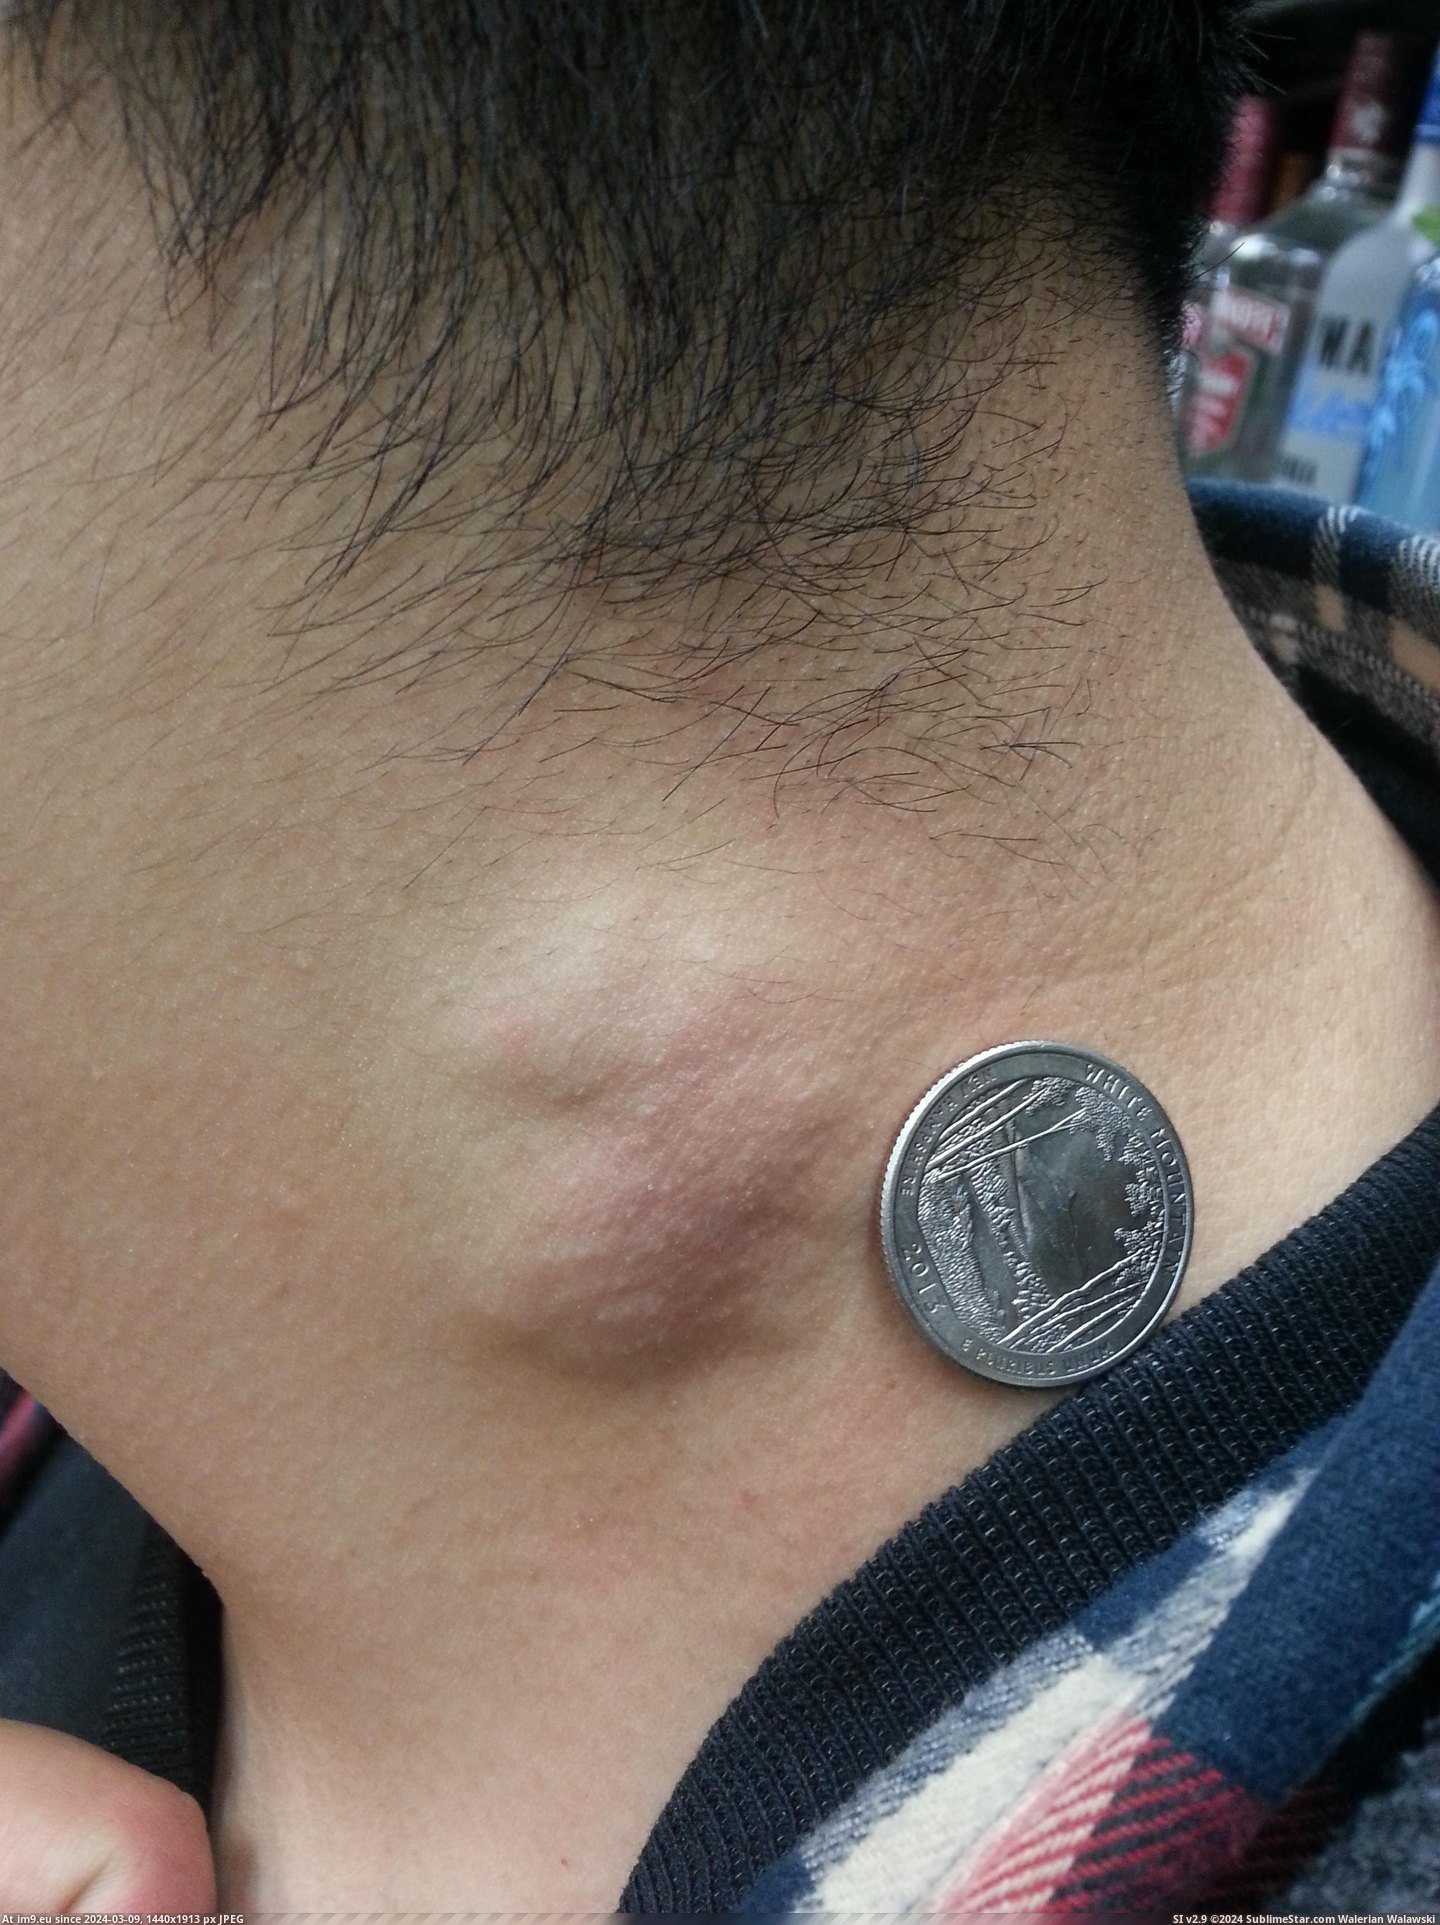 #Funny #Wtf #For #Happened #Banana #Quarter #Neck #Size #Feels #Hour #Worker [Wtf] Co-worker said my neck feels funny and an hour later this happened. Didn't have a banana so I used a quarter for size. Pic. (Bild von album My r/WTF favs))